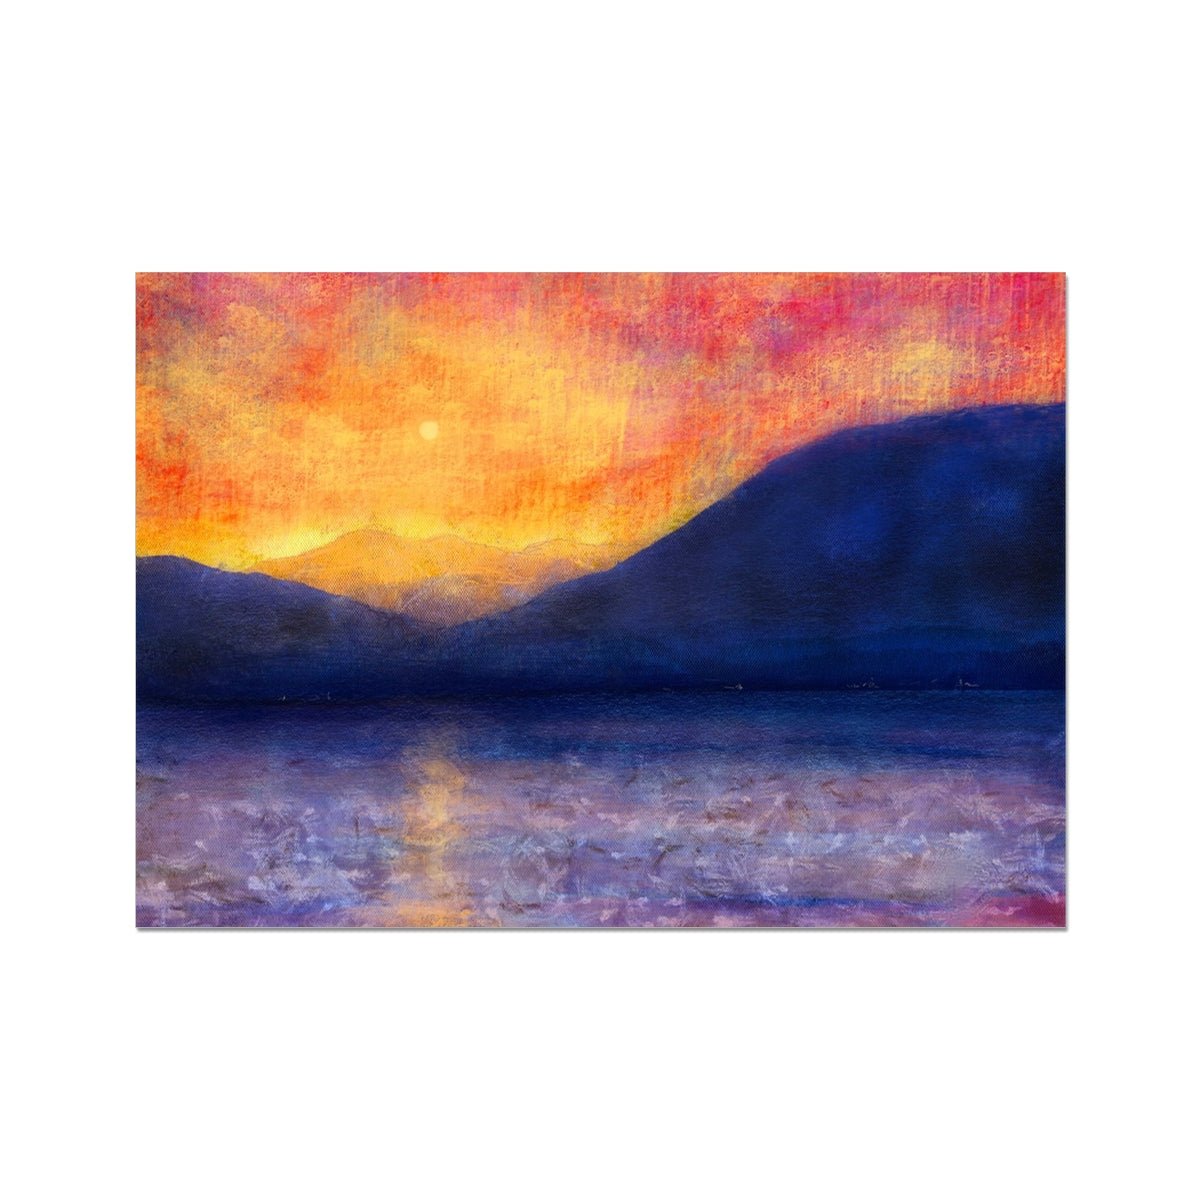 Sunset Approaching Mull Painting | Fine Art Prints From Scotland-Unframed Prints-Hebridean Islands Art Gallery-A2 Landscape-Paintings, Prints, Homeware, Art Gifts From Scotland By Scottish Artist Kevin Hunter